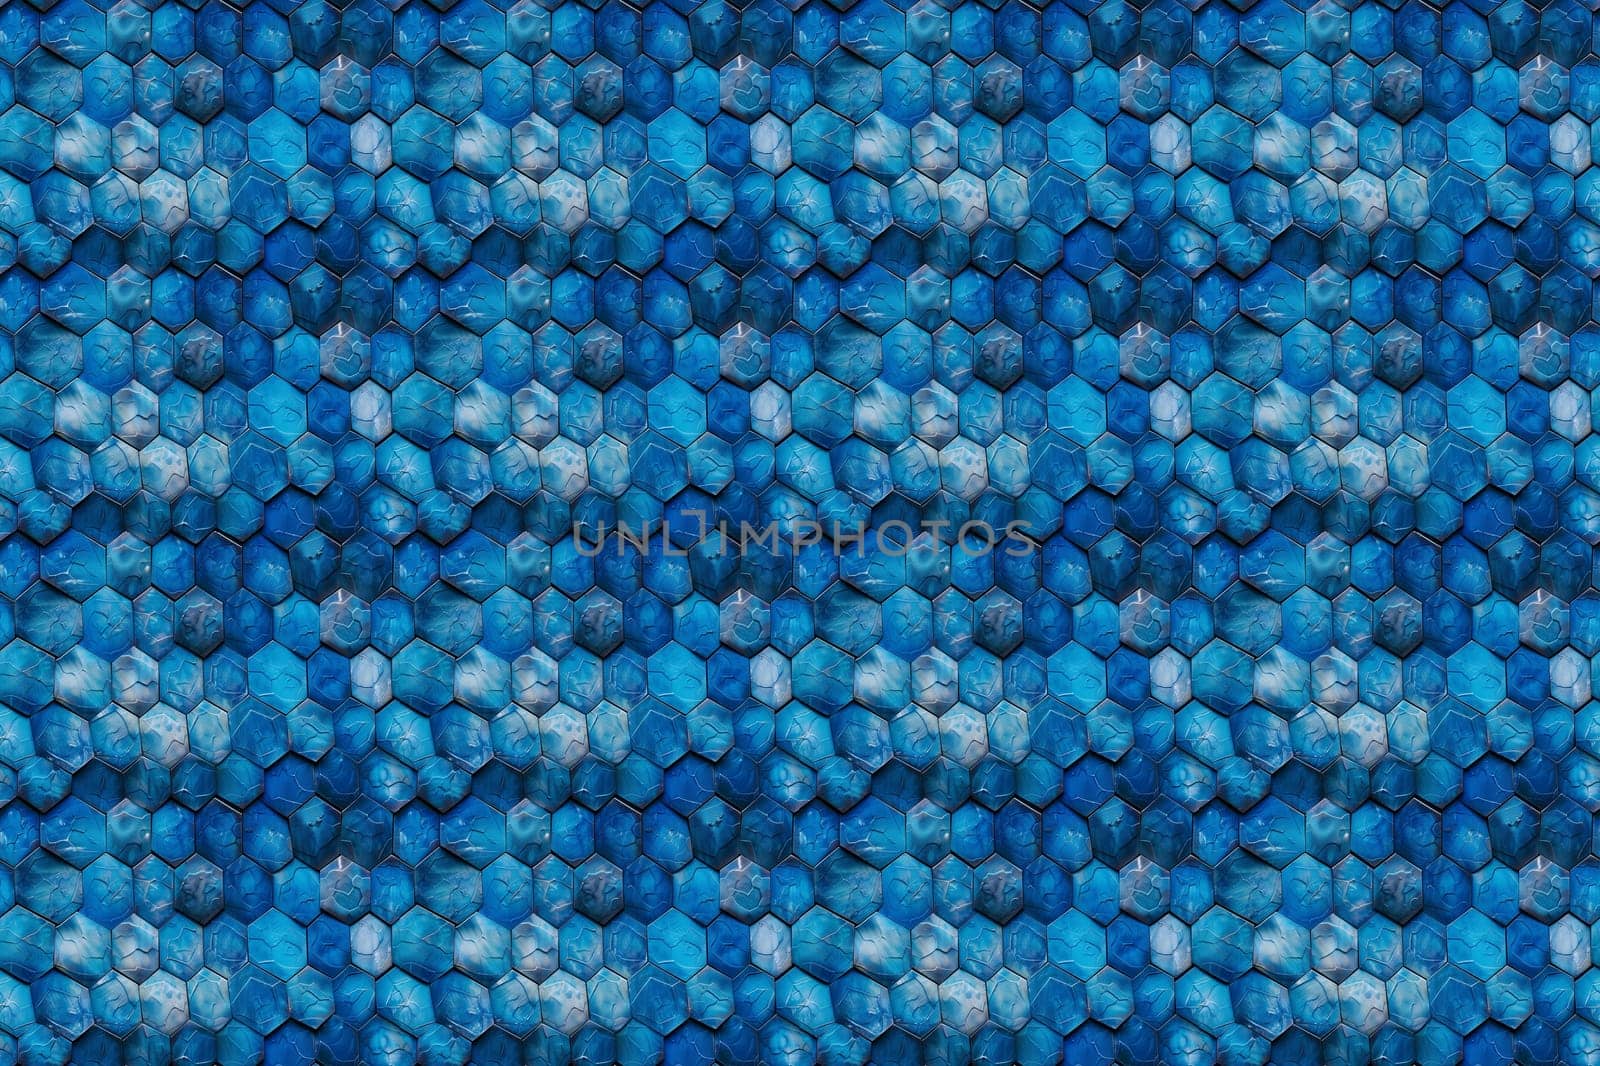 A close-up of a repeating pattern of blue hexagonal shapes. The hexagons are arranged in a slightly offset grid, creating a 3D effect.